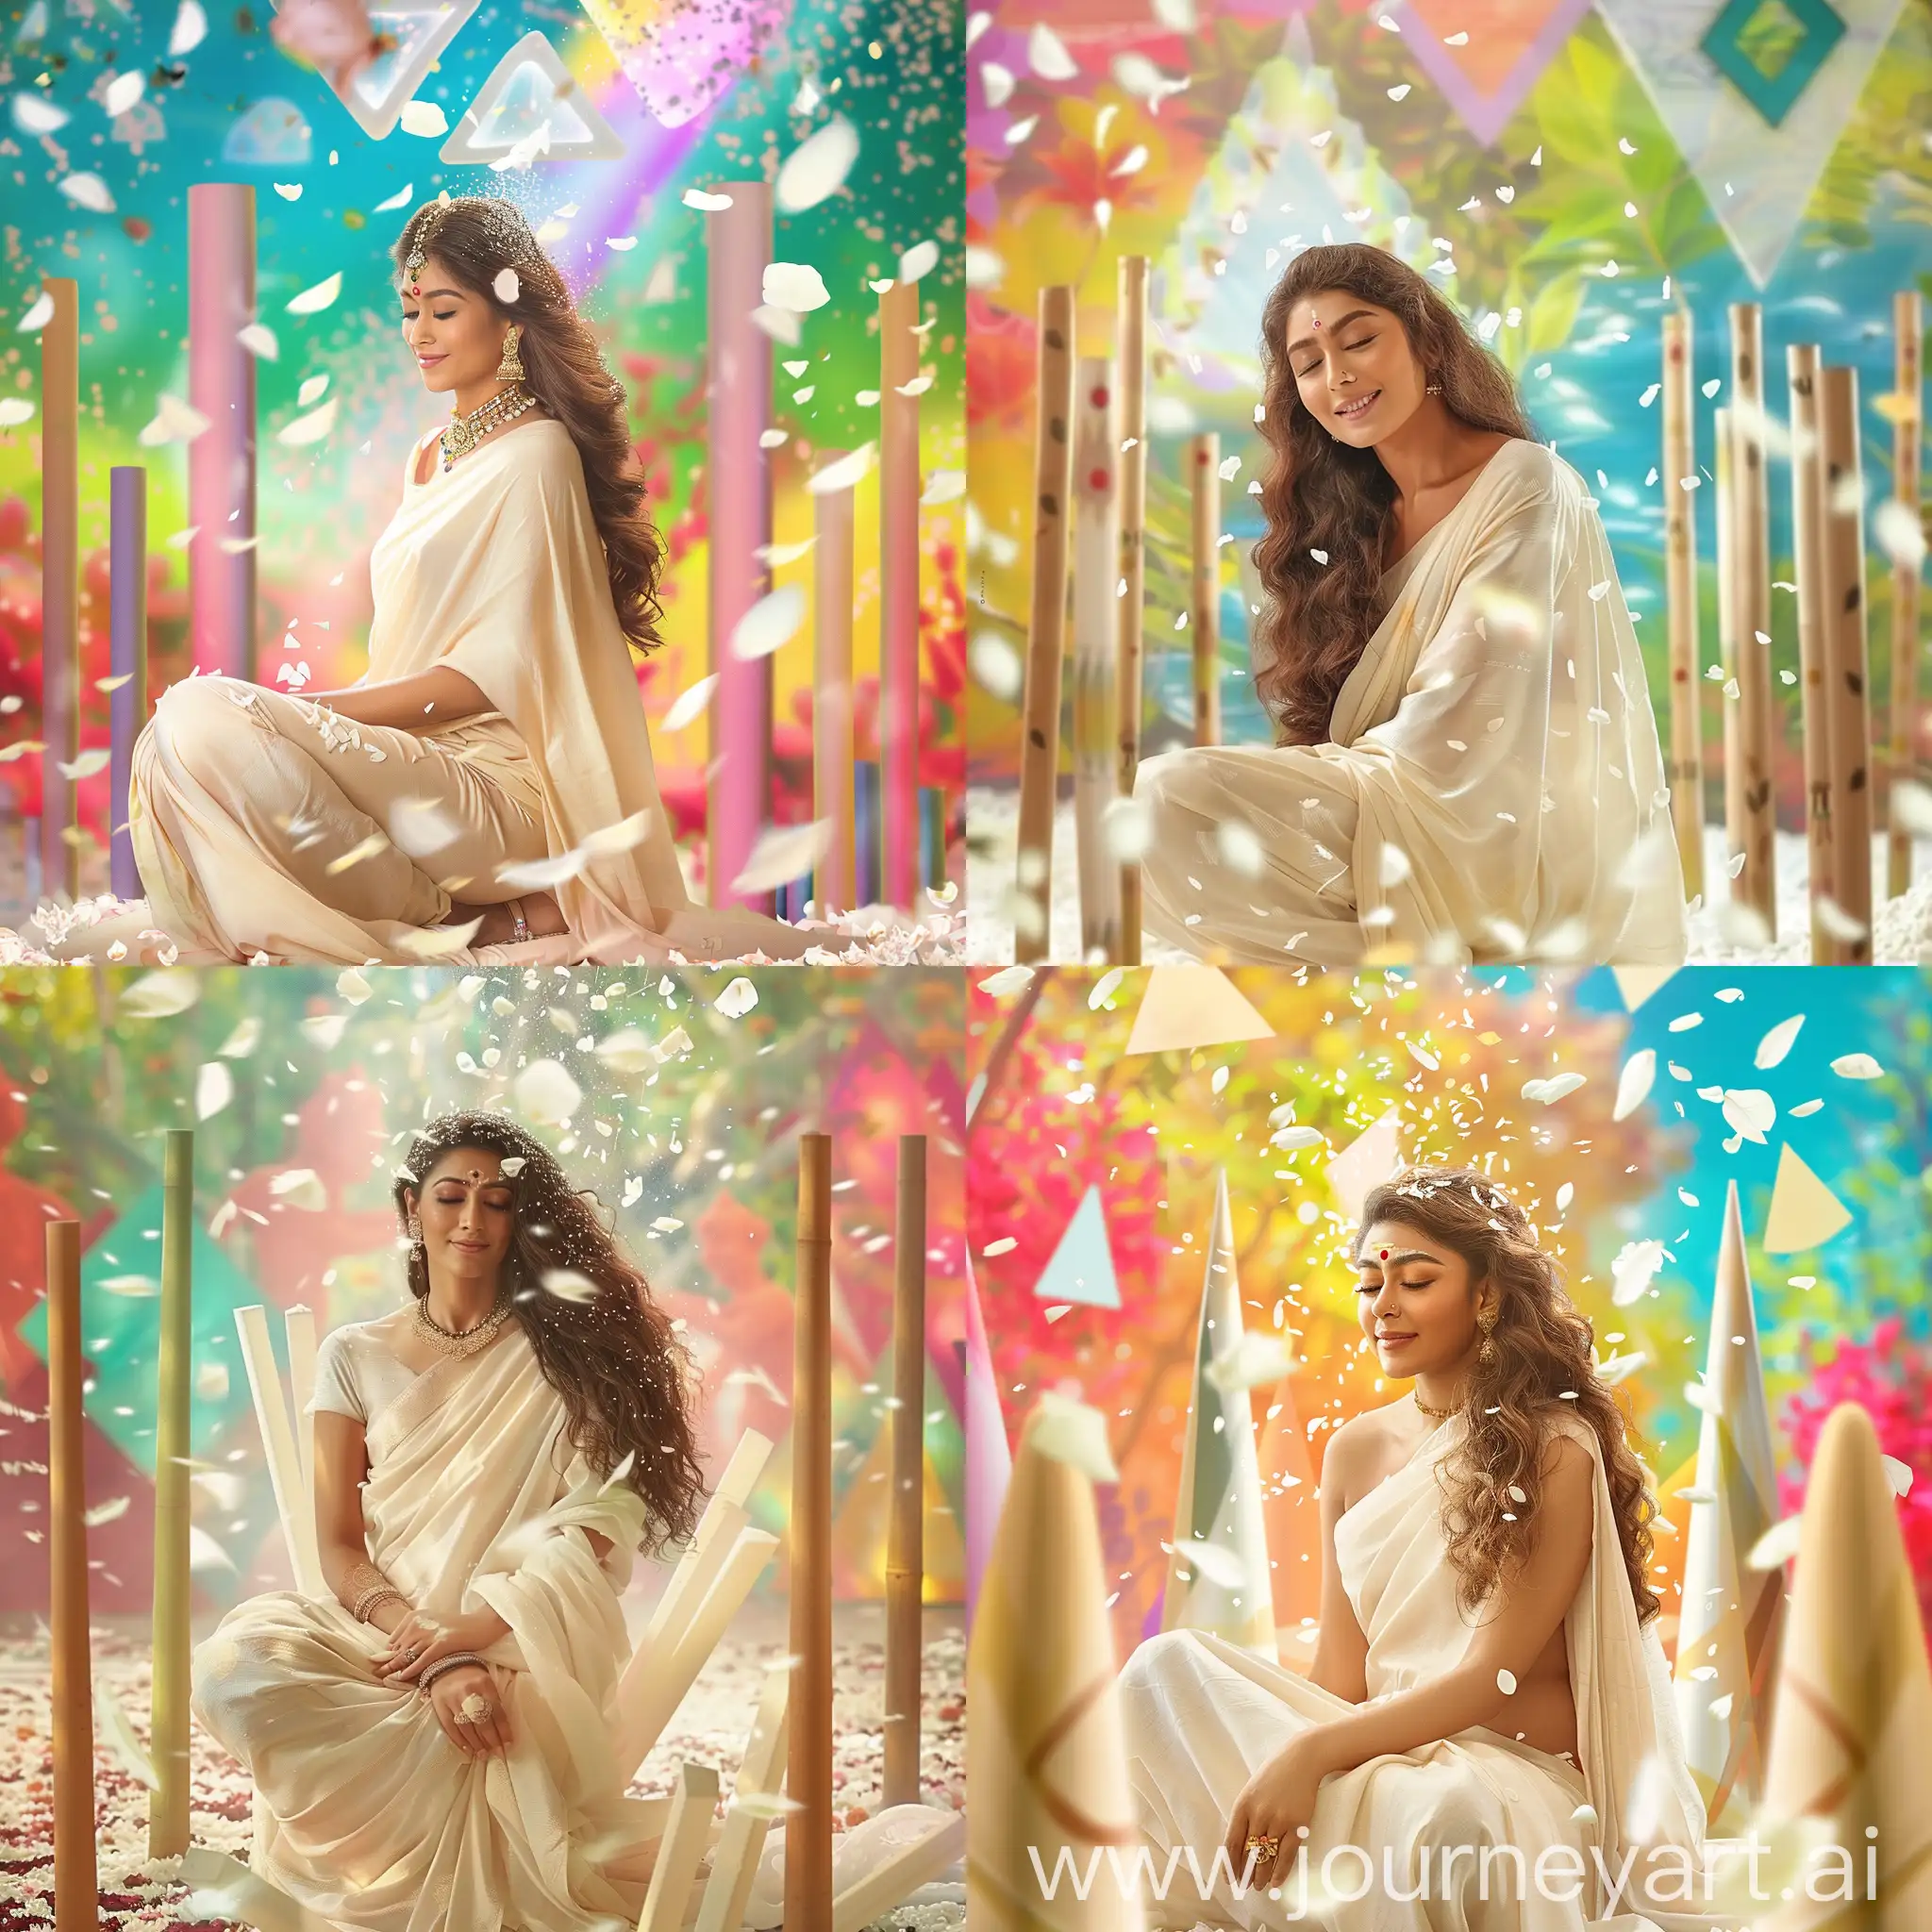 Create a stunning visual of Nayanthara, wearing a offwhite creamy saree, is sitting in squatting posture, there are medium shaped poles that resemble a tool of creation, shapes in the background as properties, she showered with white petals from heaven, her eyes are closed in peace, she is happy and tranquil, a attractive, beautiful, curvy, half body shot, perfect composition, golden ratio in the composition, vibrant colorful sacred grove background